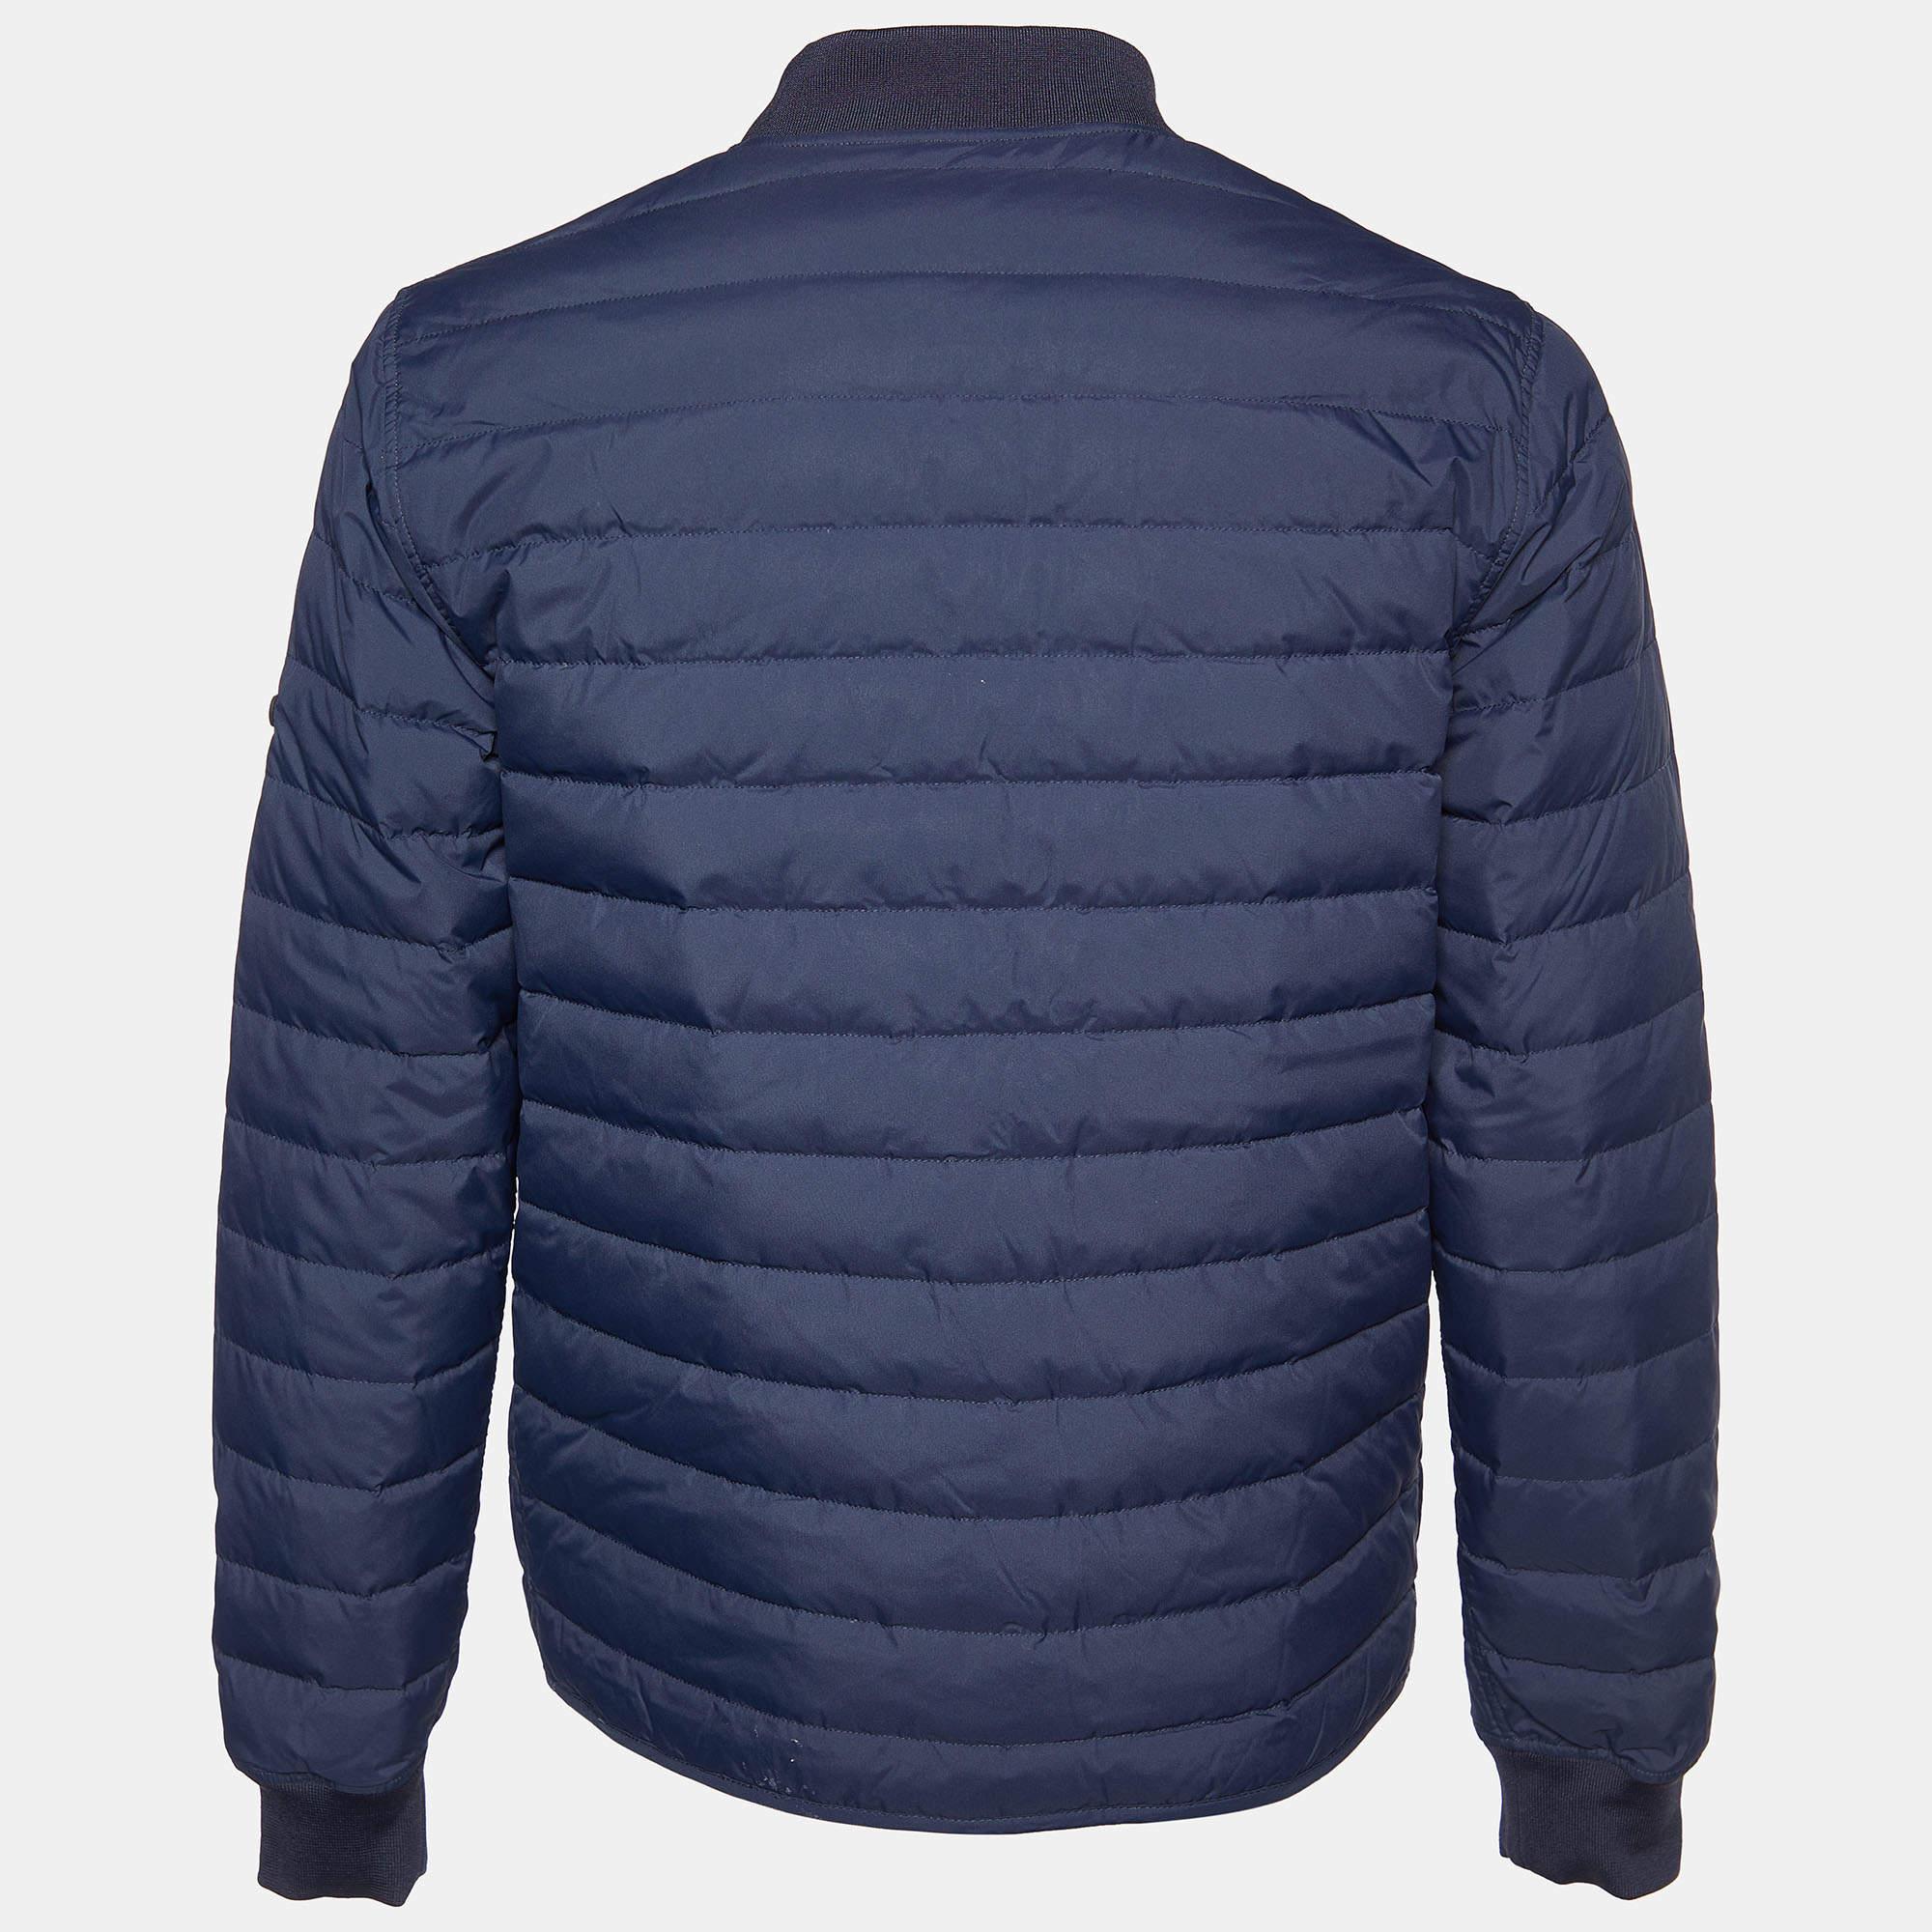 The Kenzo jacket is a versatile fashion piece. On one side, it showcases a vibrant blue color with a unique print, while the reverse side offers a classic quilted design. This jacket combines style and functionality, making it a must-have addition